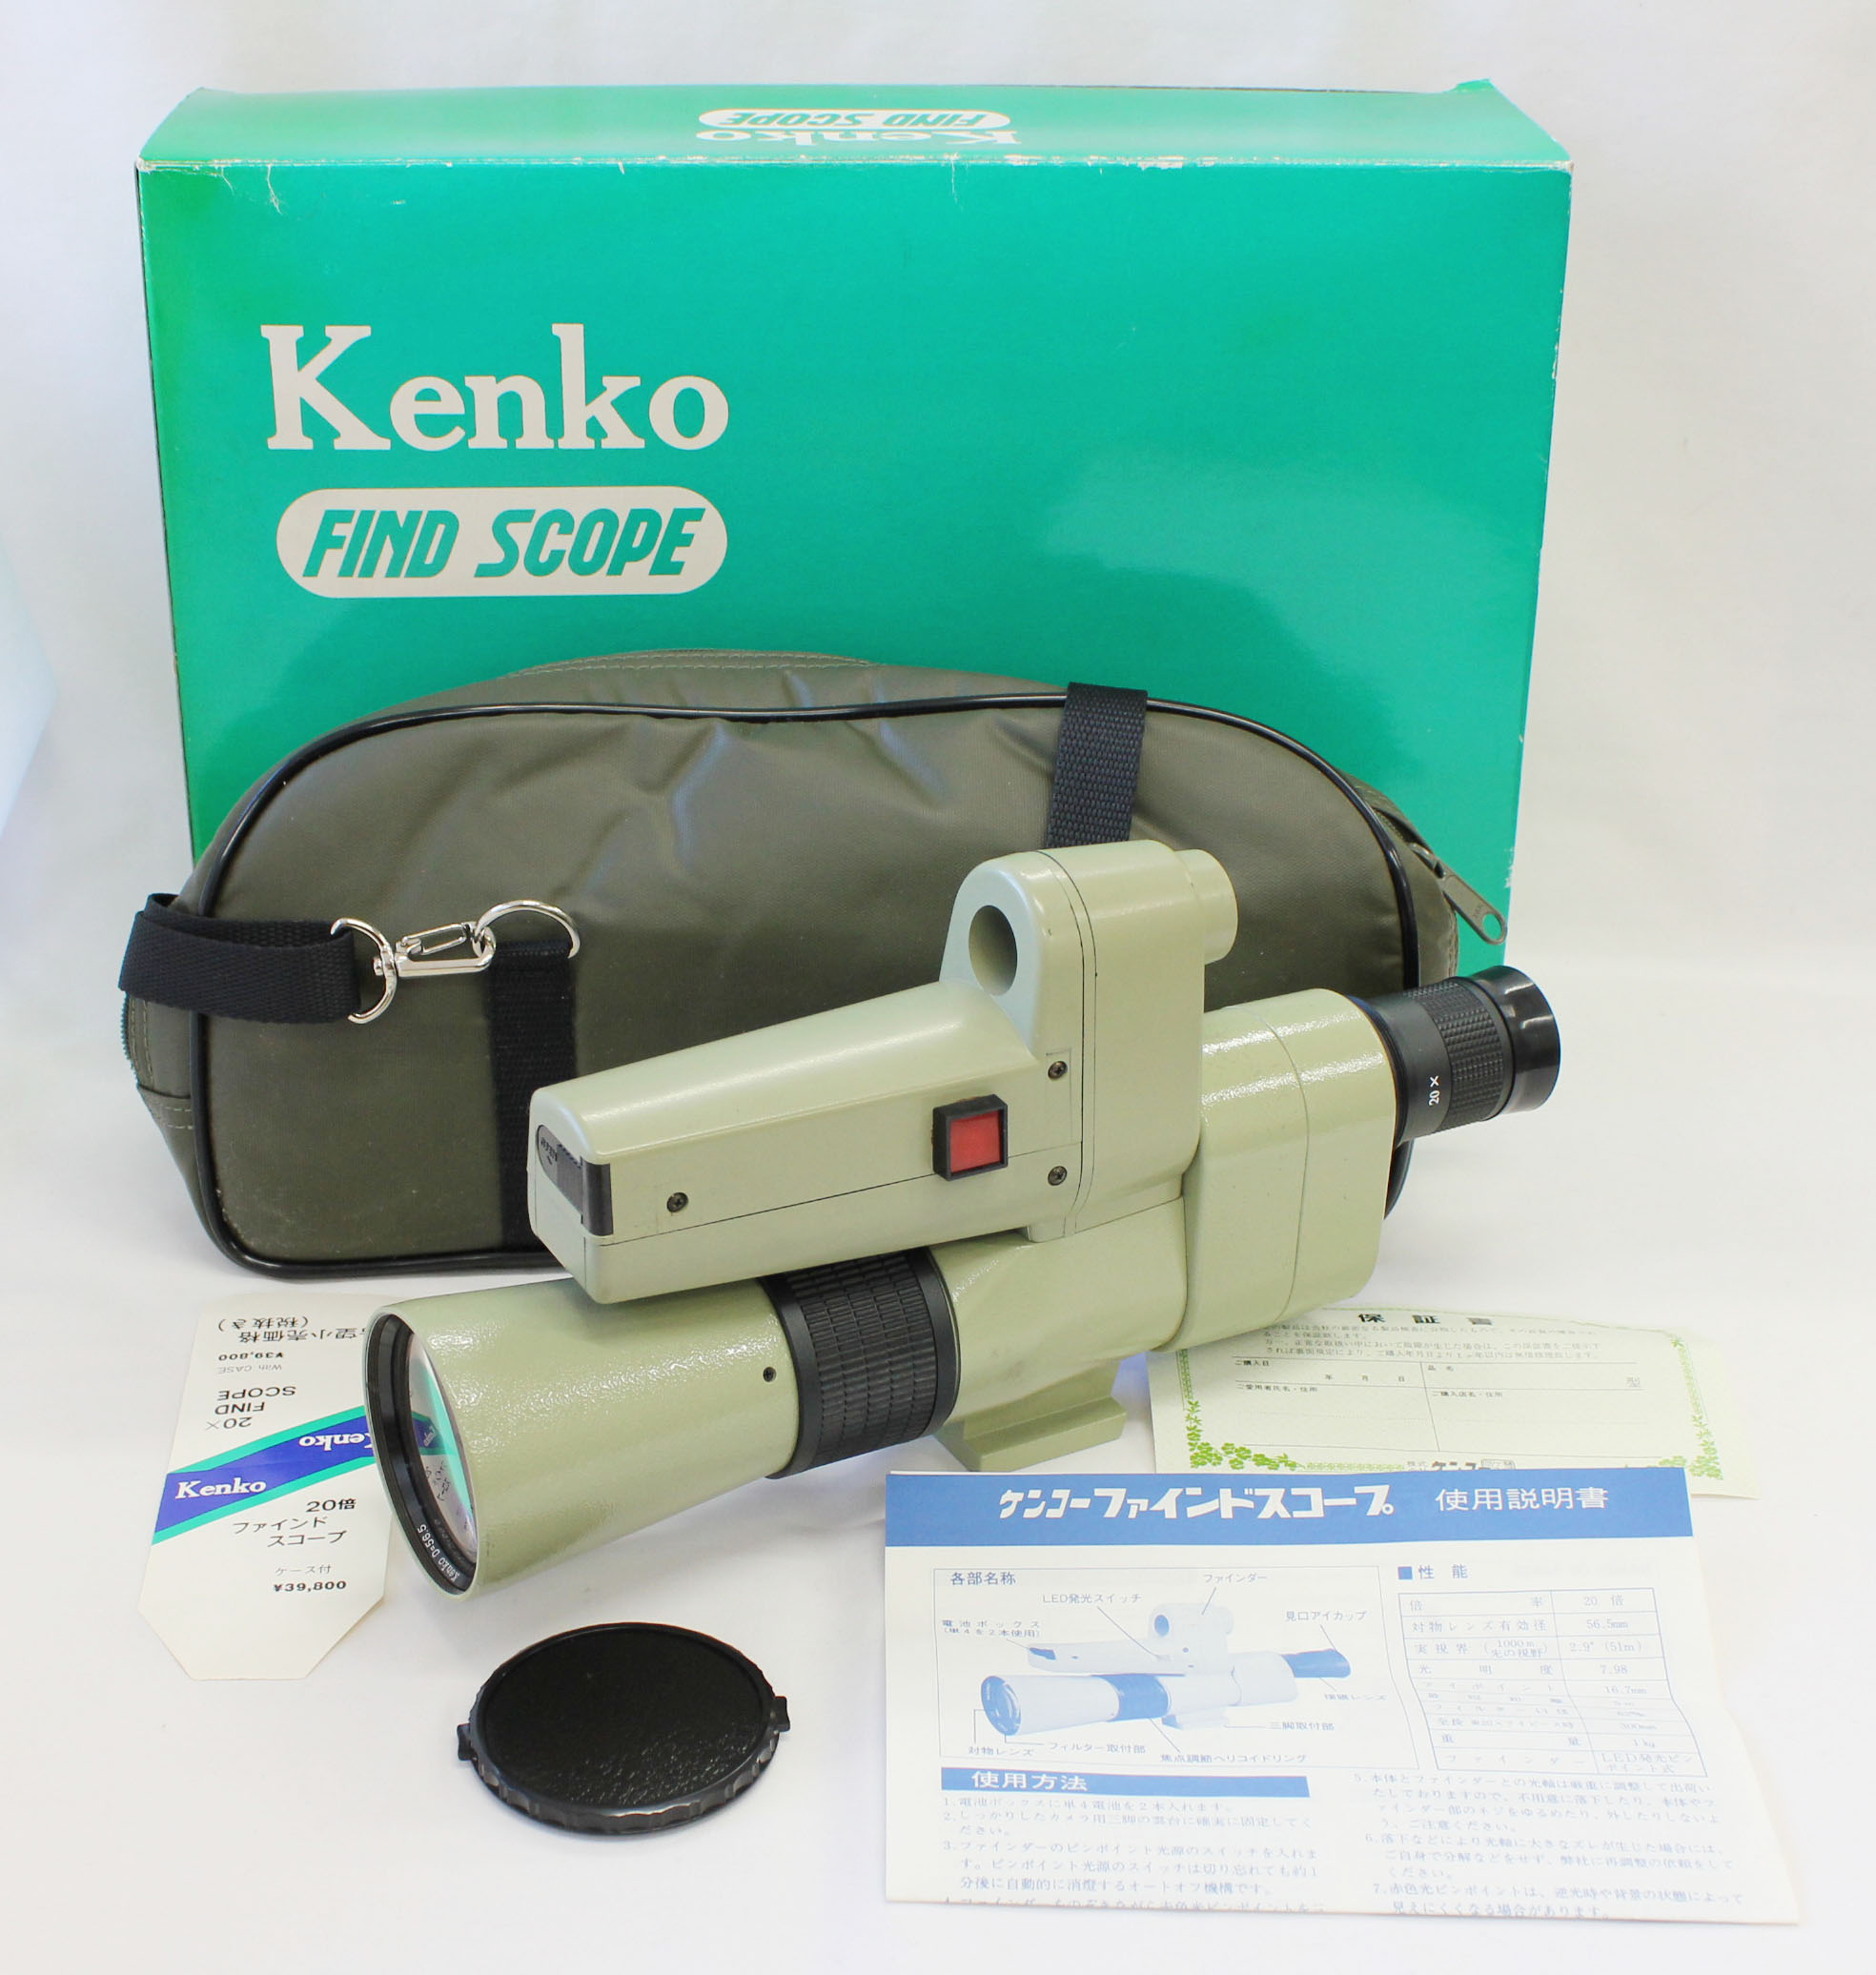 Japan Used Camera Shop | Kenko Find Scope Spotting Scope 20x D=56.5 with LED Aiming View Finder in Case / Box from Japan